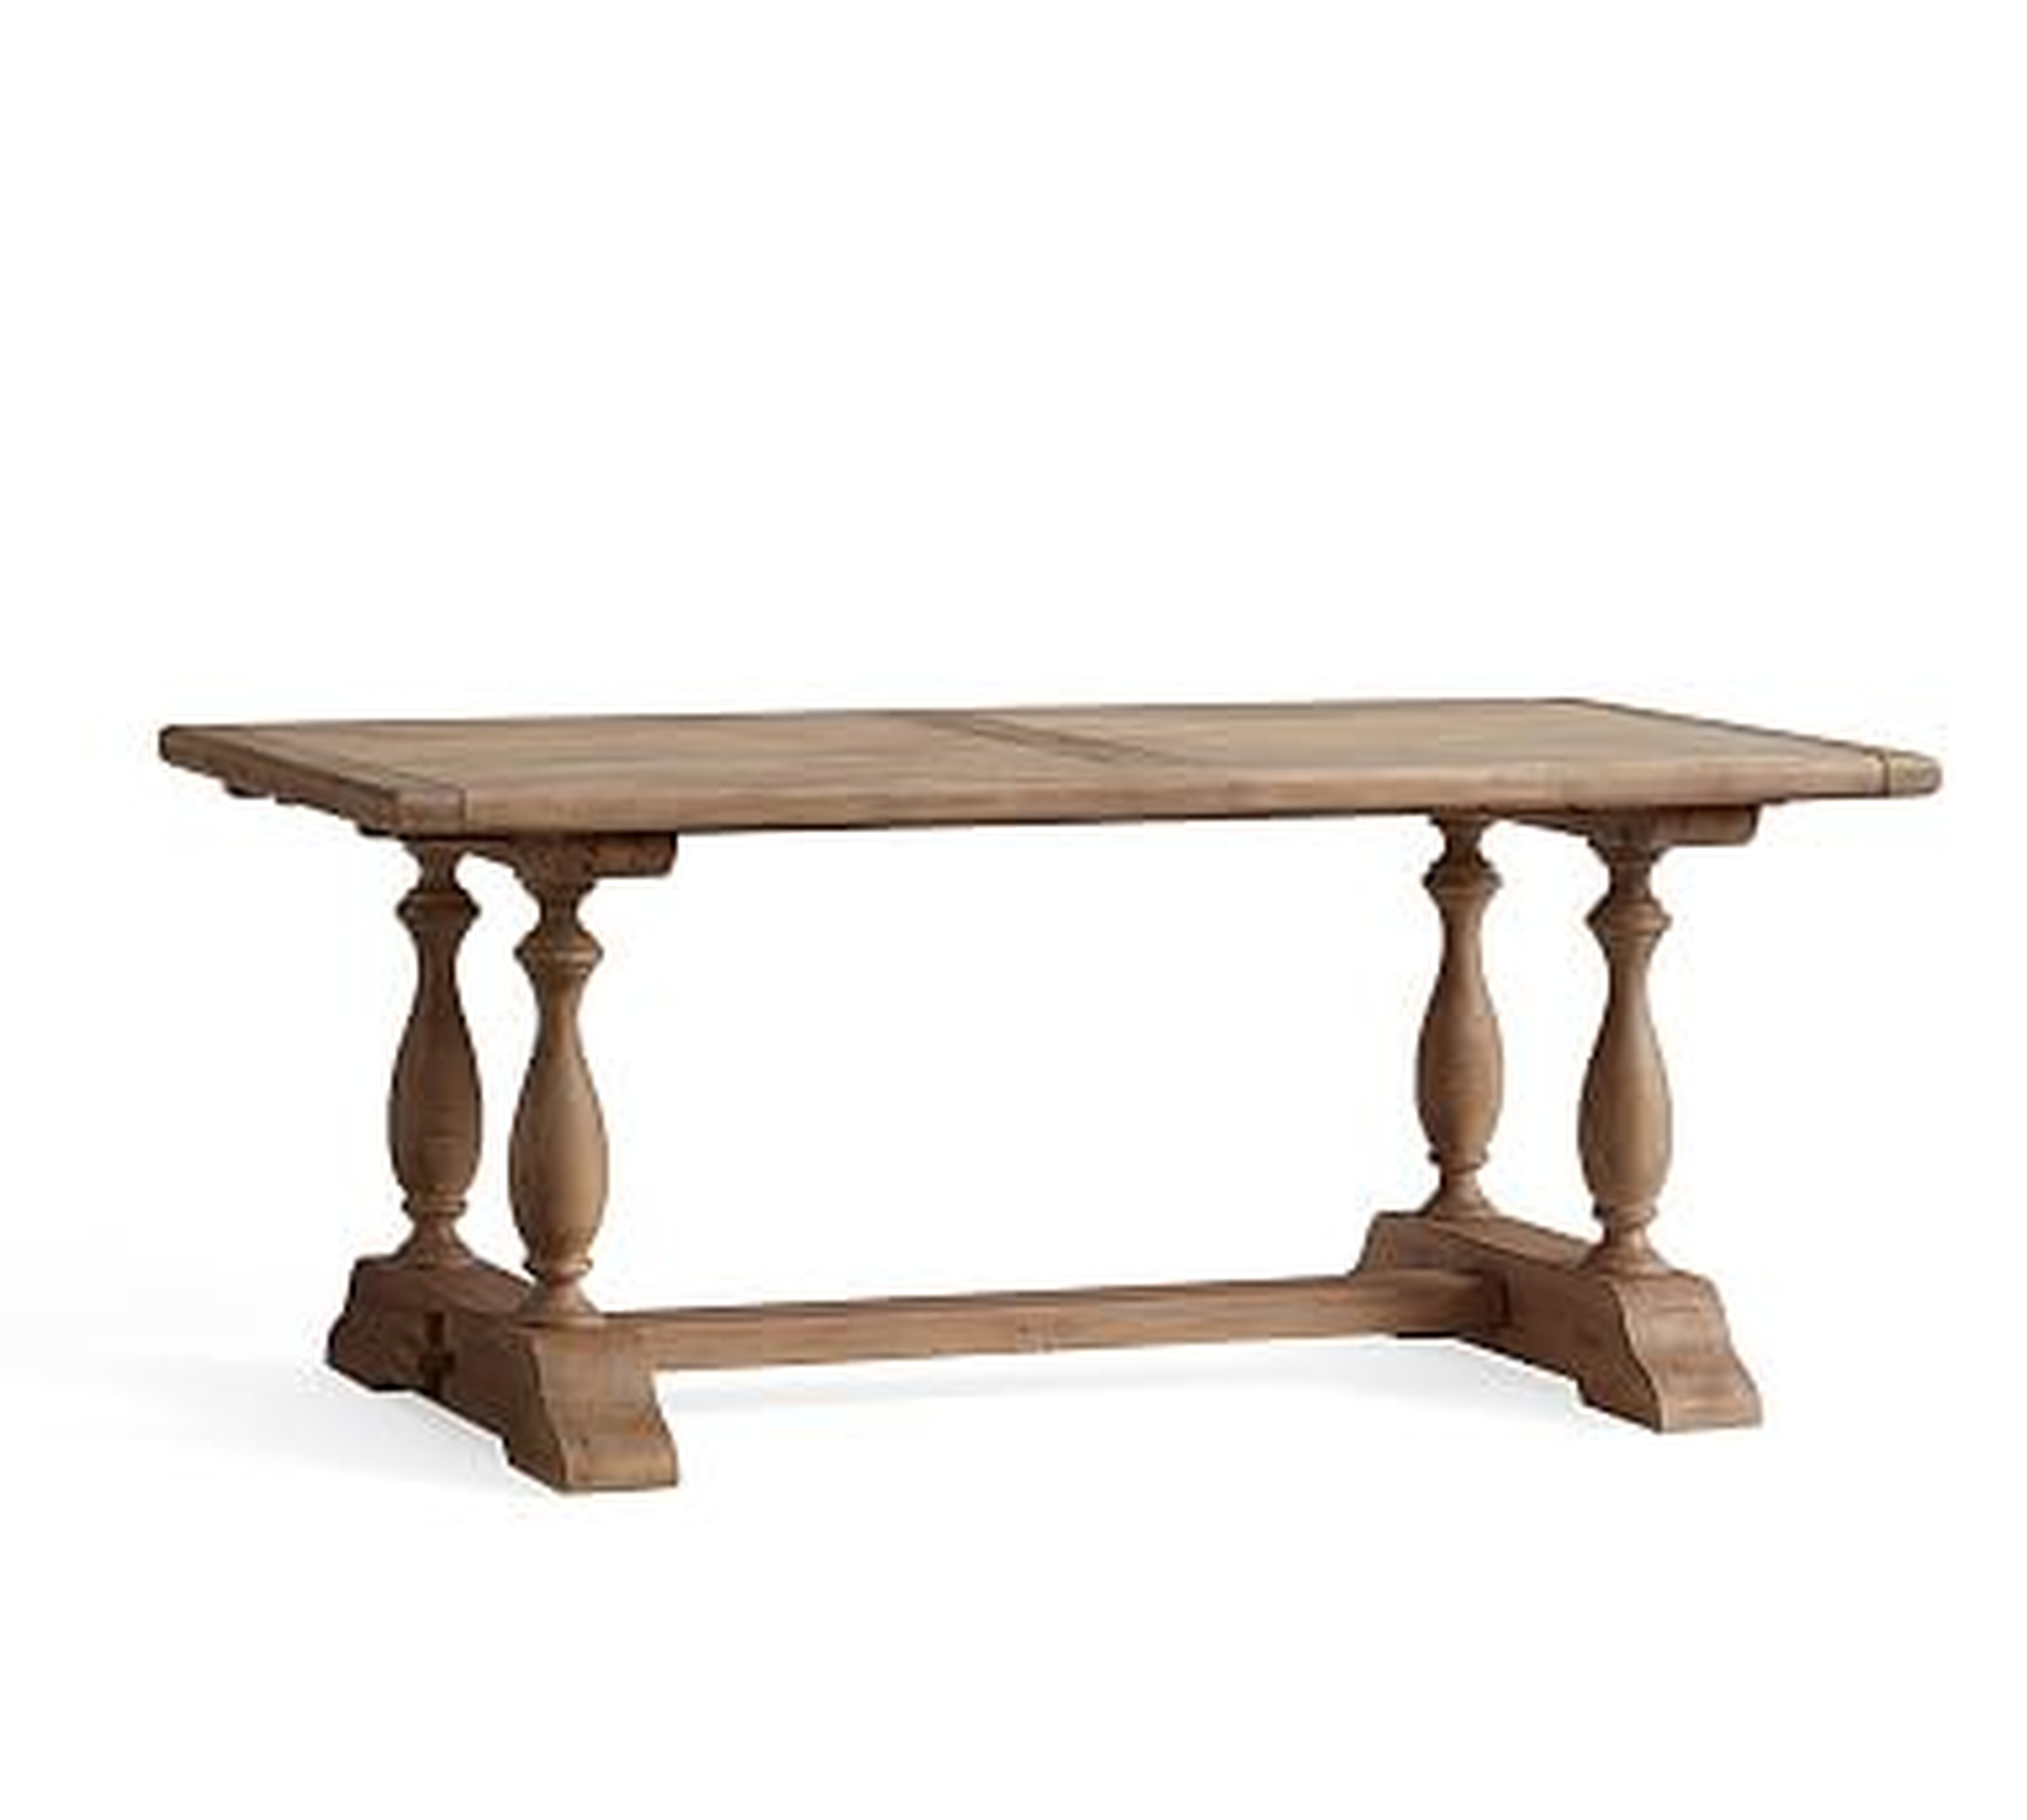 Parkmore Extending Dining Table, Lancaster Pine, 72"L x 38"W - Pottery Barn